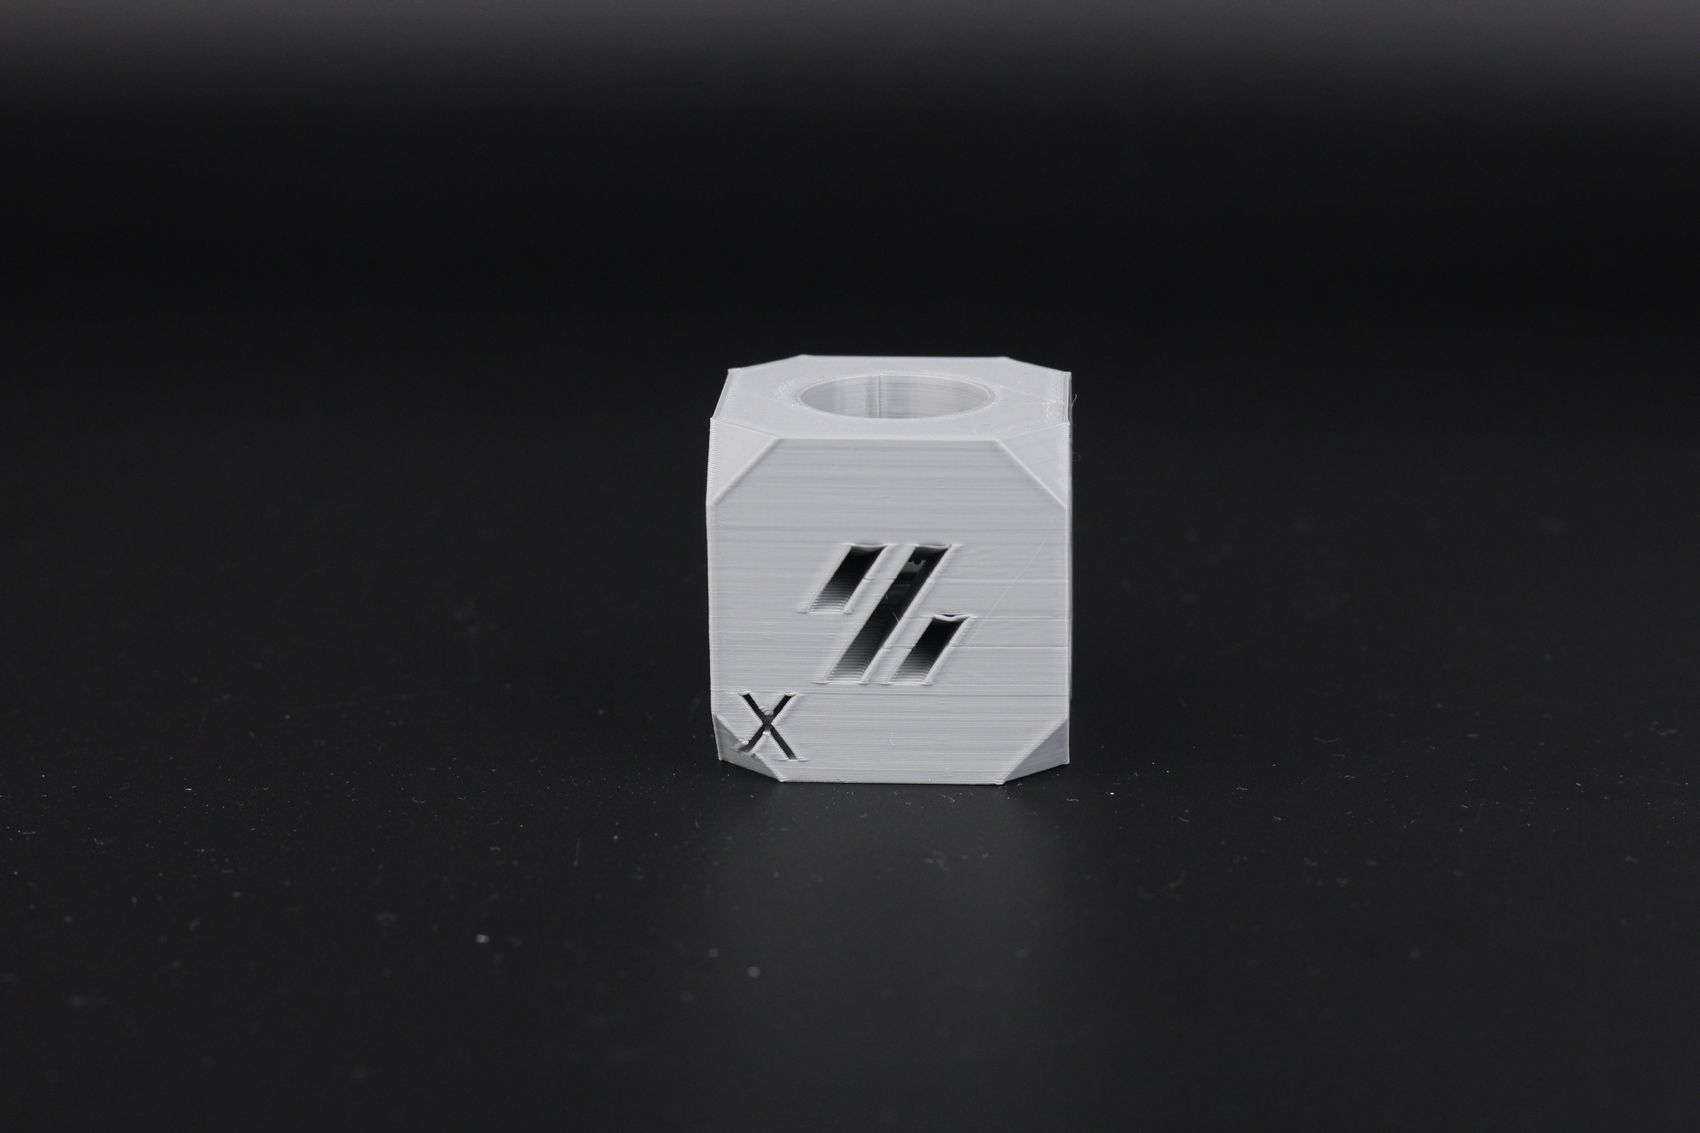 Voron Calibration Cube on Anycubic Kobra Plus1 | Anycubic Kobra Plus Review: A Larger Vyper